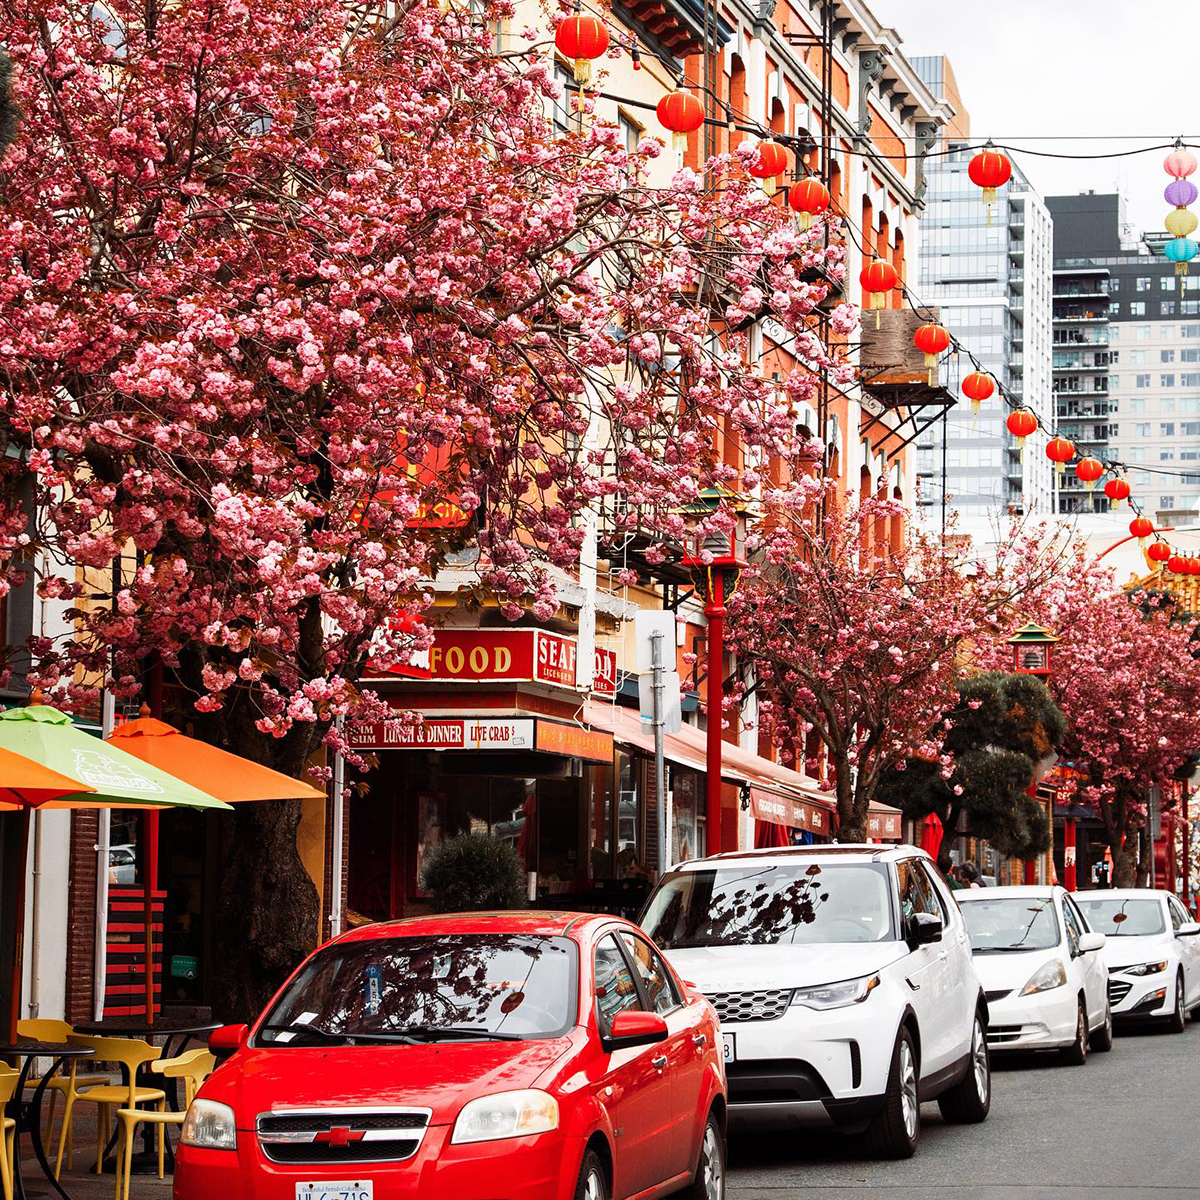 Cherry blossoms make for a nice accent to Chinatown’s red lanterns 🏮🌸 📍: Chinatown 📸: ericisadas (IG) #explorevictoria #chinatown #yyj #cherryblossoms #spring